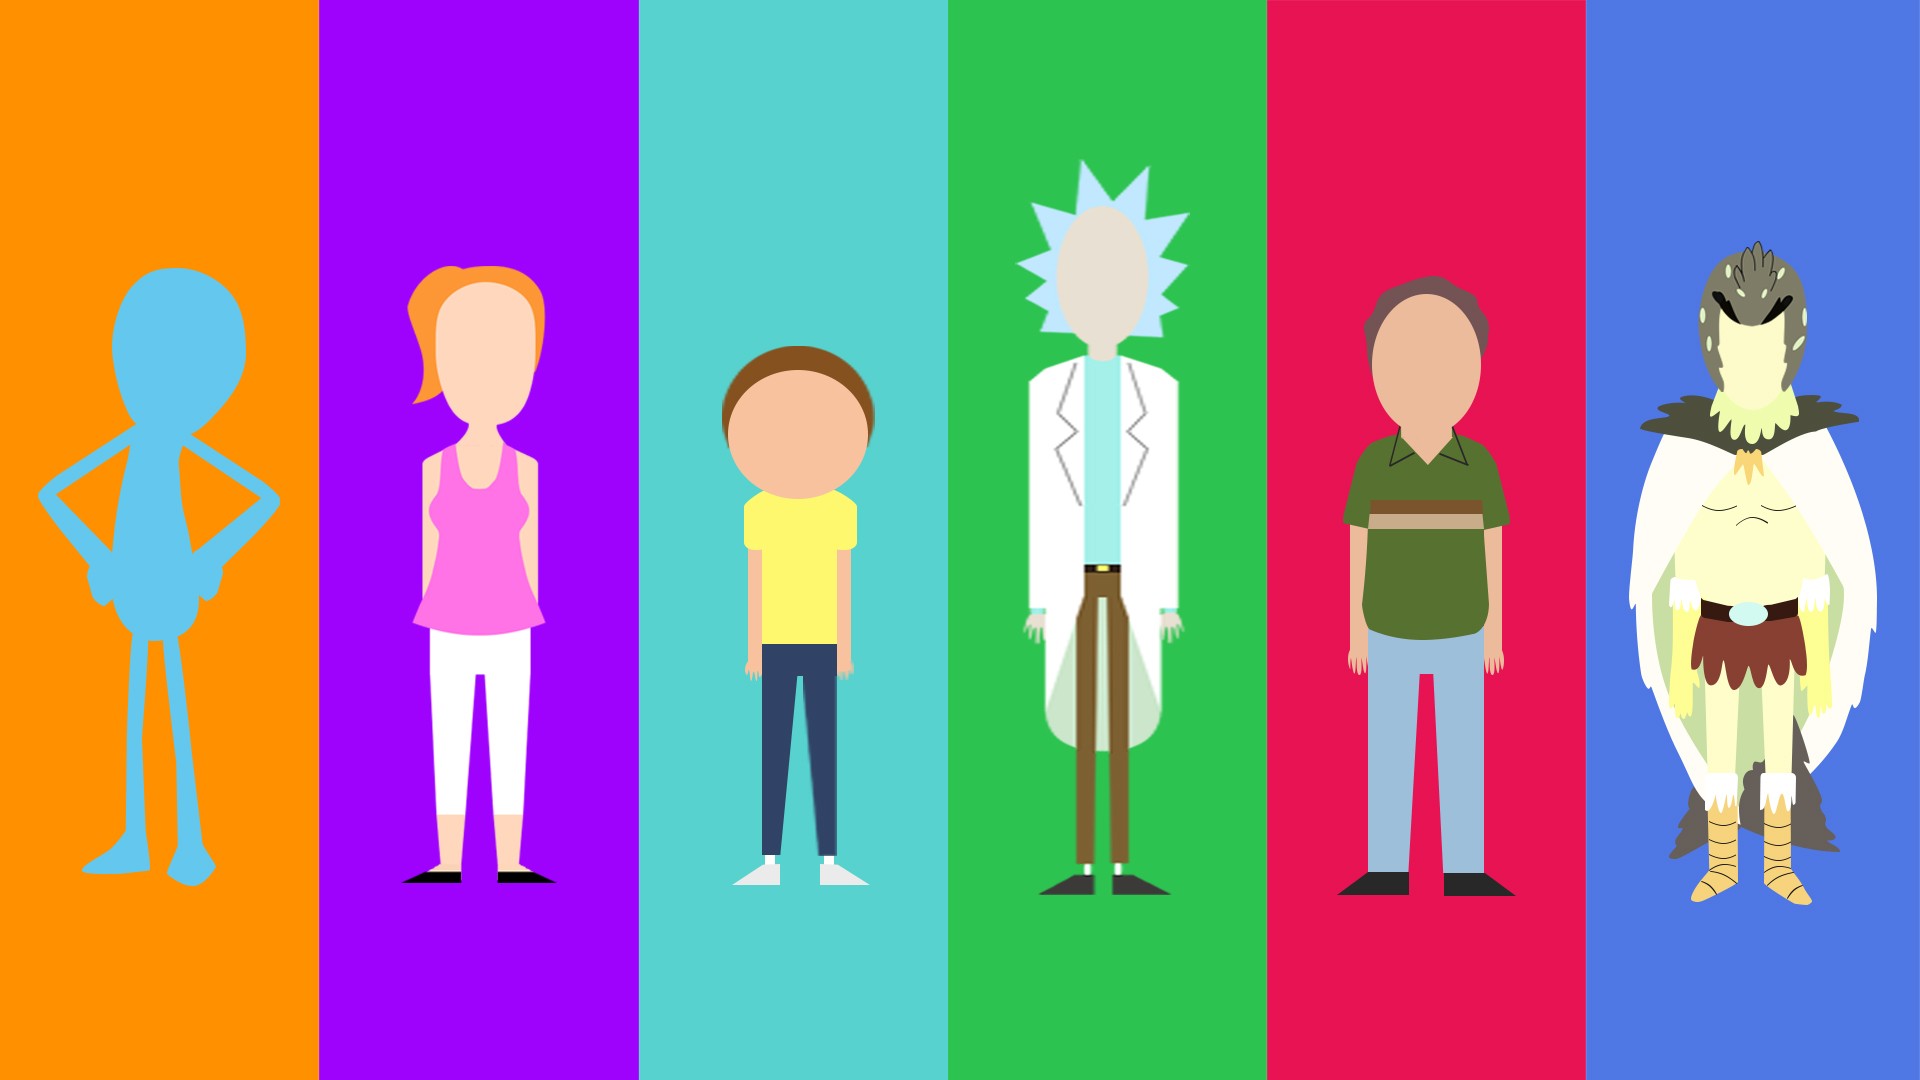 General 1920x1080 Rick and Morty minimalism cartoon Rick Sanchez Morty Smith Bird Person Jerry Smith Summer Smith Mr. Meeseeks collage colorful panels TV series